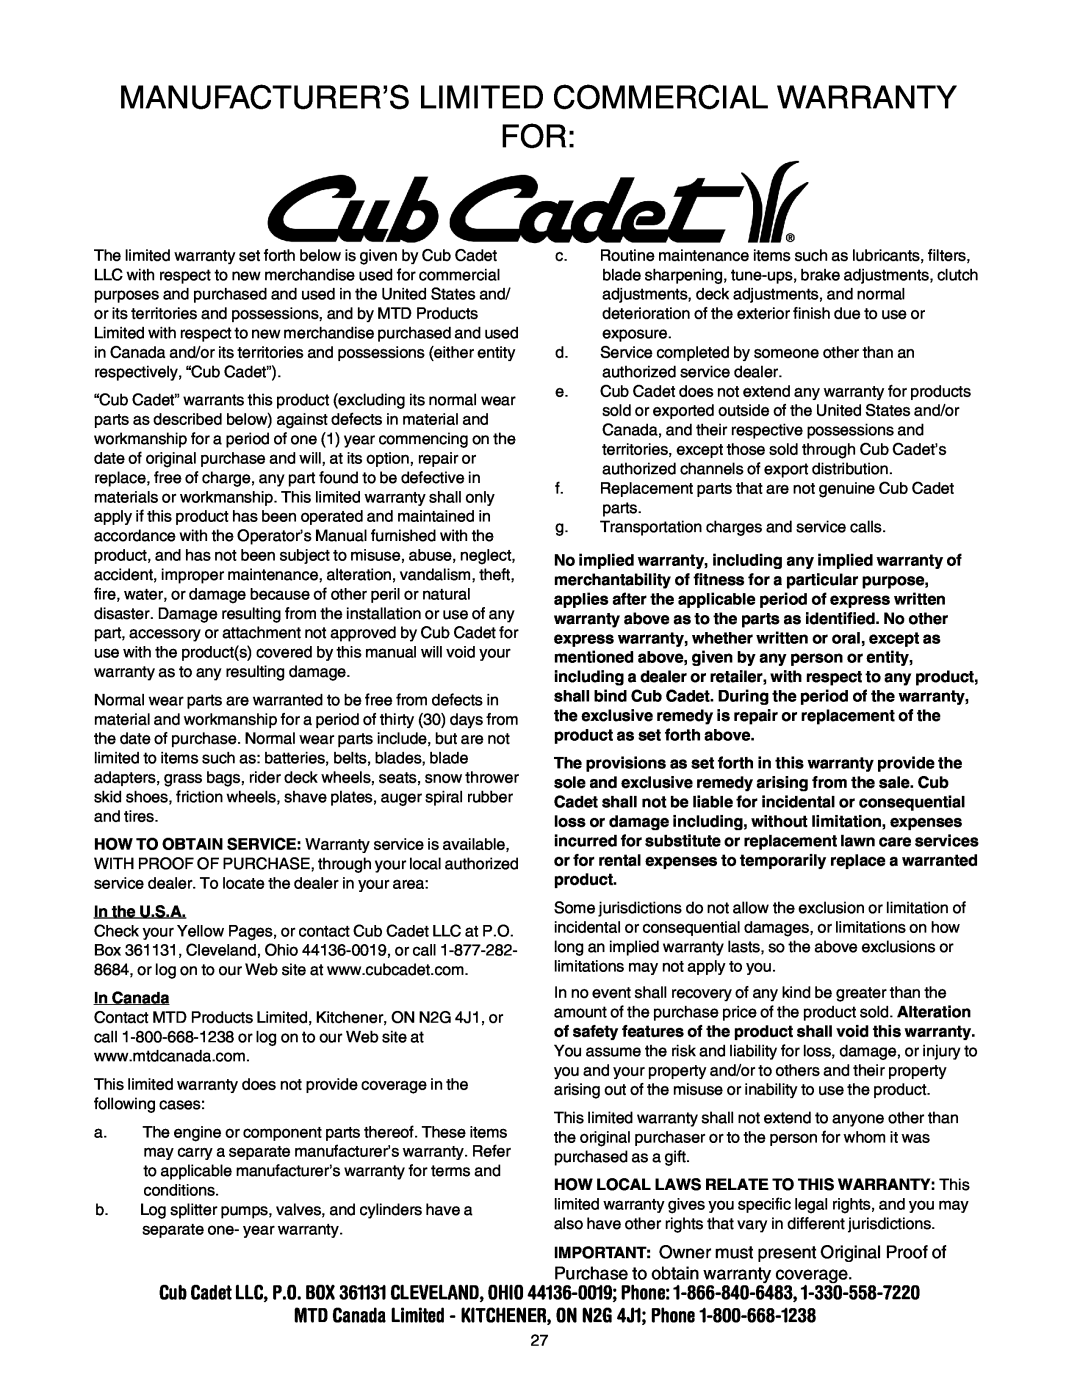 Cub Cadet 730 STE manual Manufacturer’S Limited Commercial Warranty For, IMPORTANT Owner must present Original Proof of 